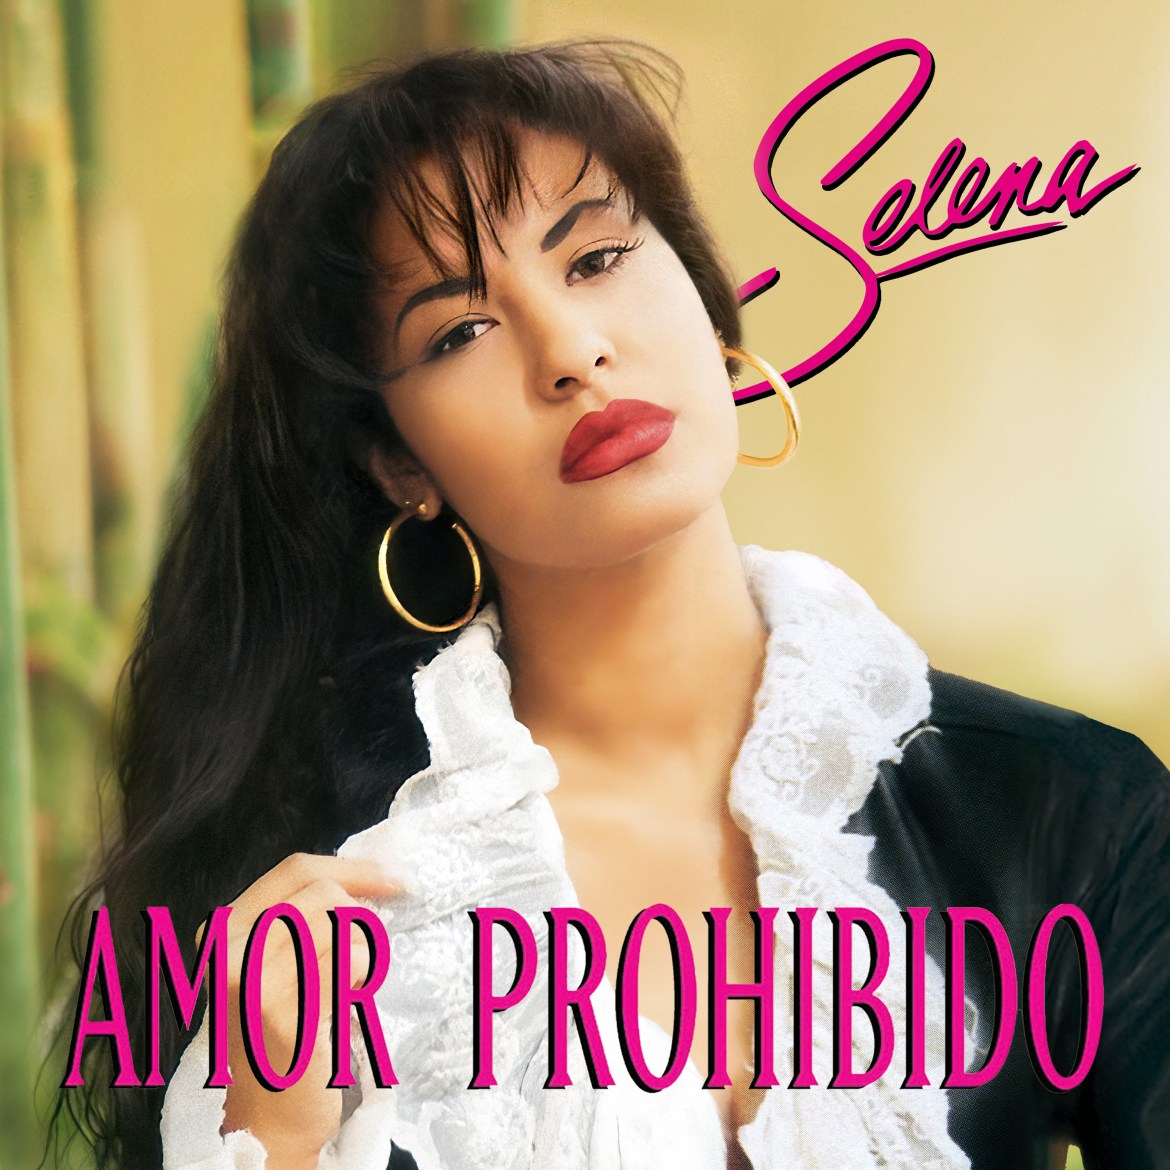 Album cover of Amor Prohibido by Selena. : A woman adjusts her collar as she poses in front of a simplistic background.